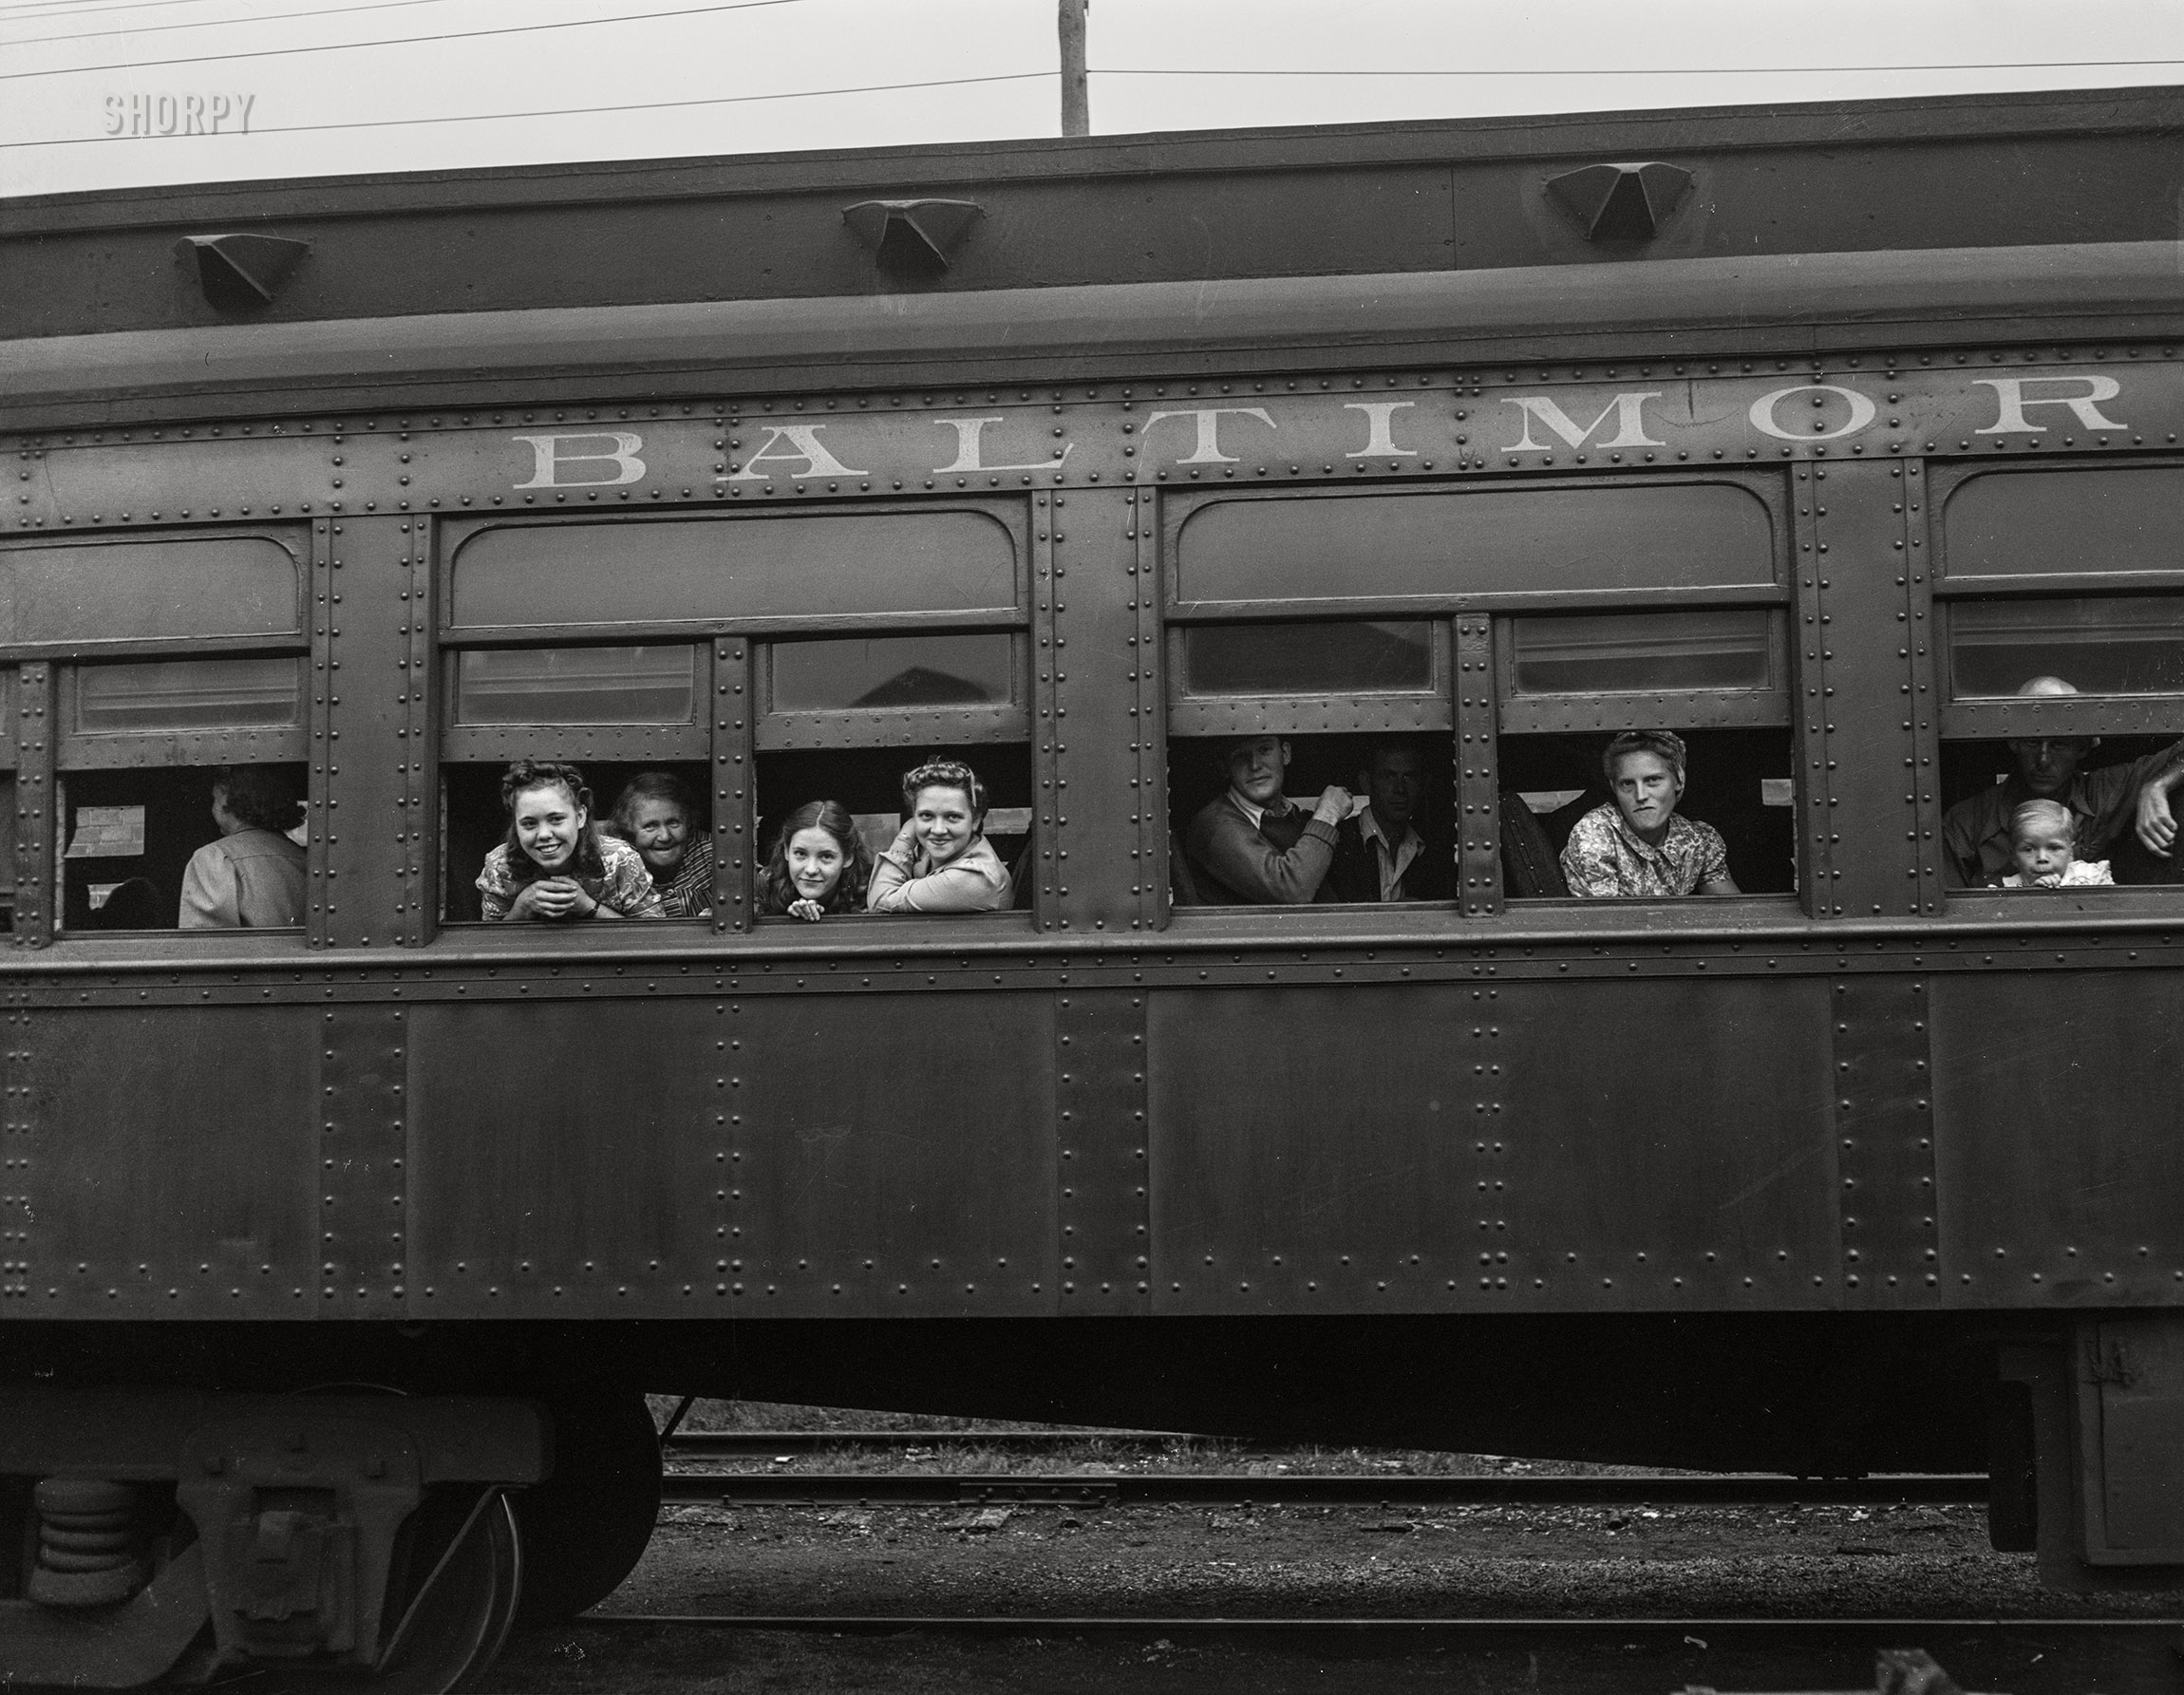 September 1942. Richwood, West Virginia. "Trainload of migratory workers (mostly high school students, many accompanied by family members) in day coach bound for the harvest fields in New York state." Photo by John Collier for the Farm Security Administration. View full size.